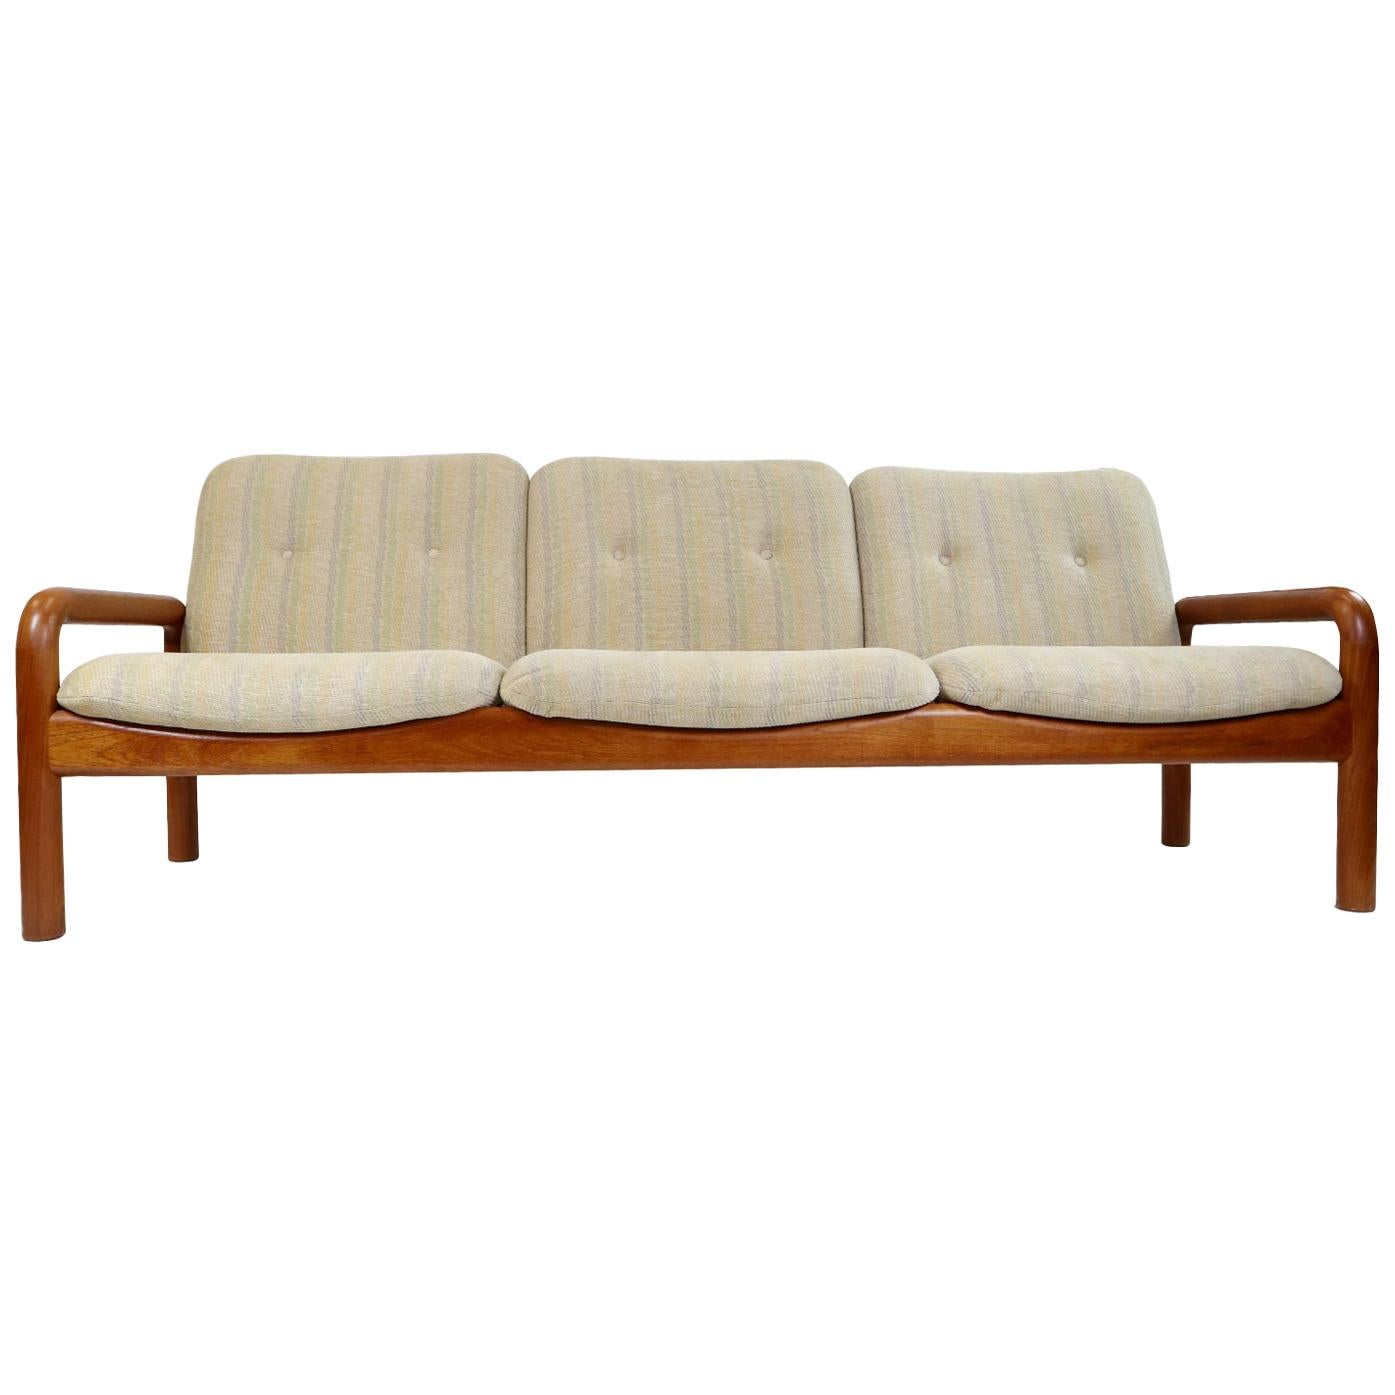 Vintage Danish modern sofa by DScan. The solid teak wood frame supports the light beige upholstered cushions. Quality is in the details with the choice of durable, attractive teak wood and plush fabric. The light beige fabric has a soft, almost